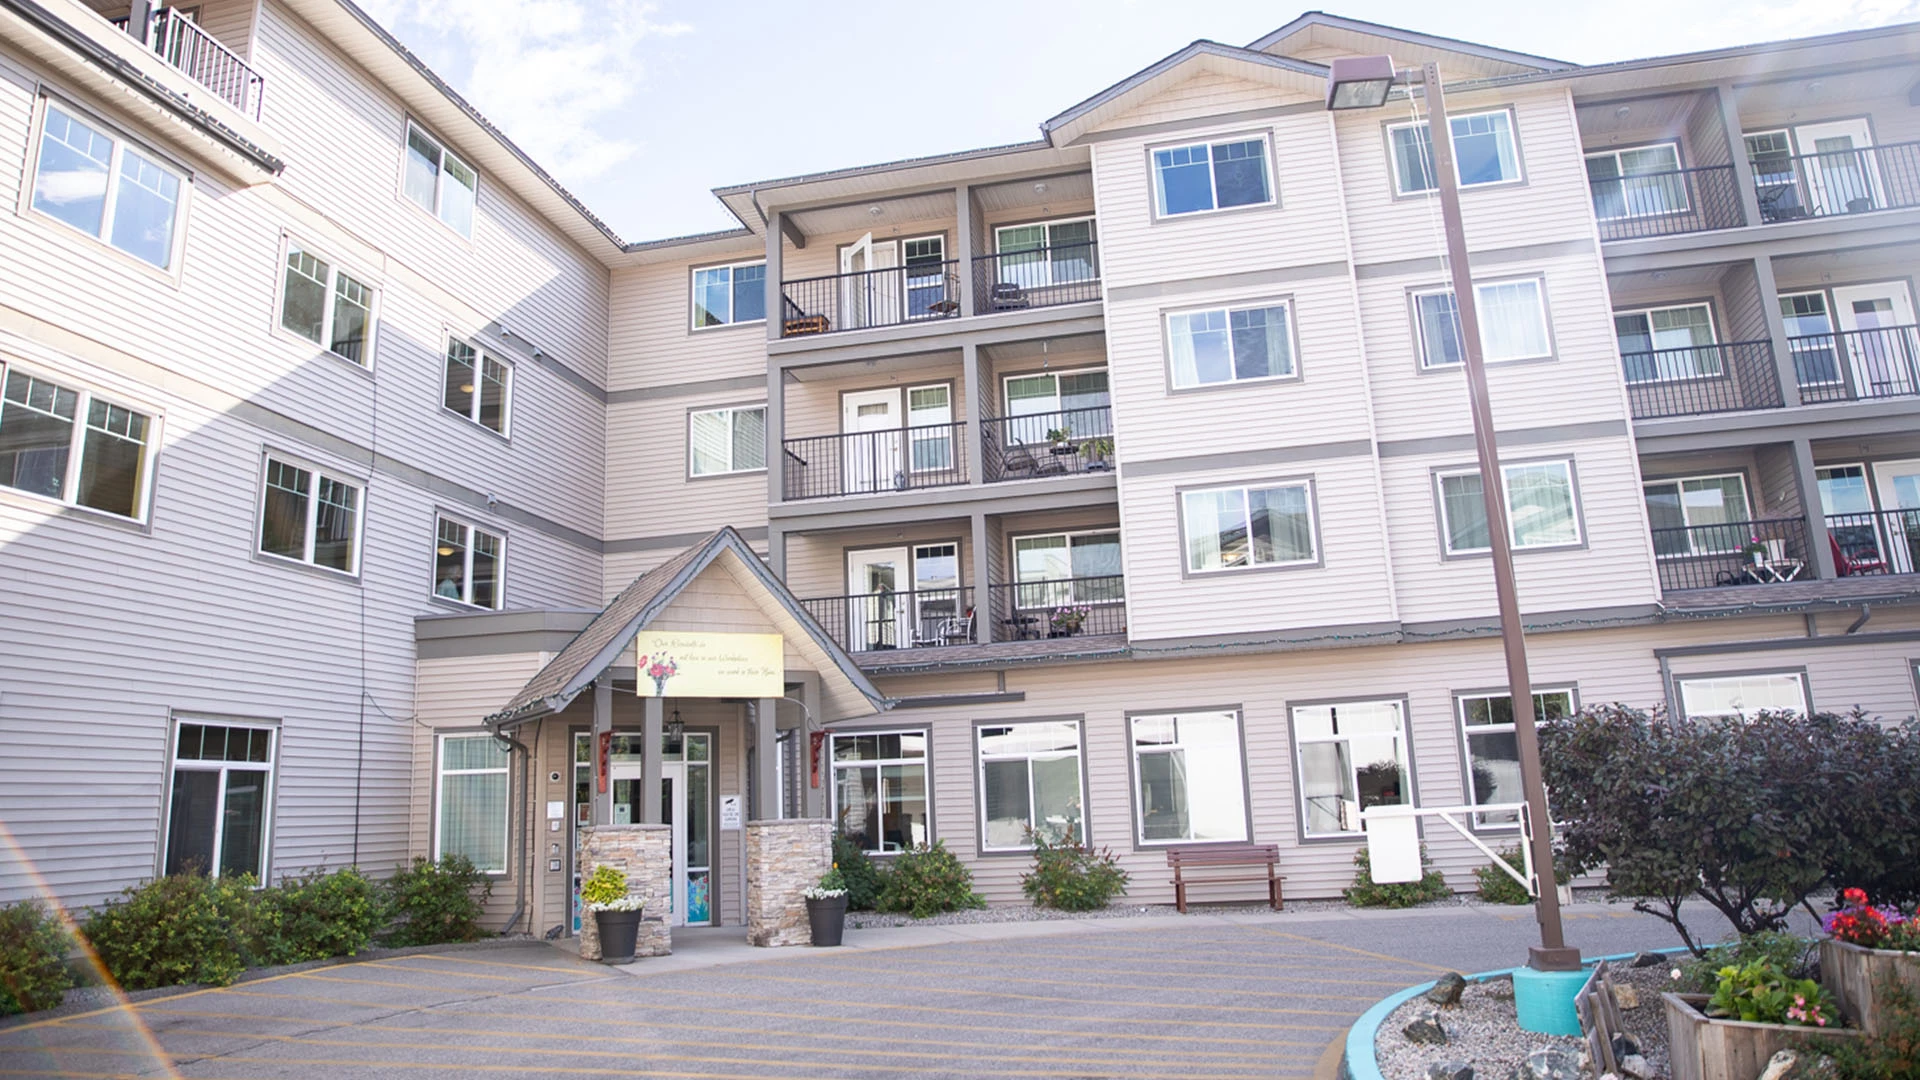 An exterior view of The Hamlets at Penticton retirement home